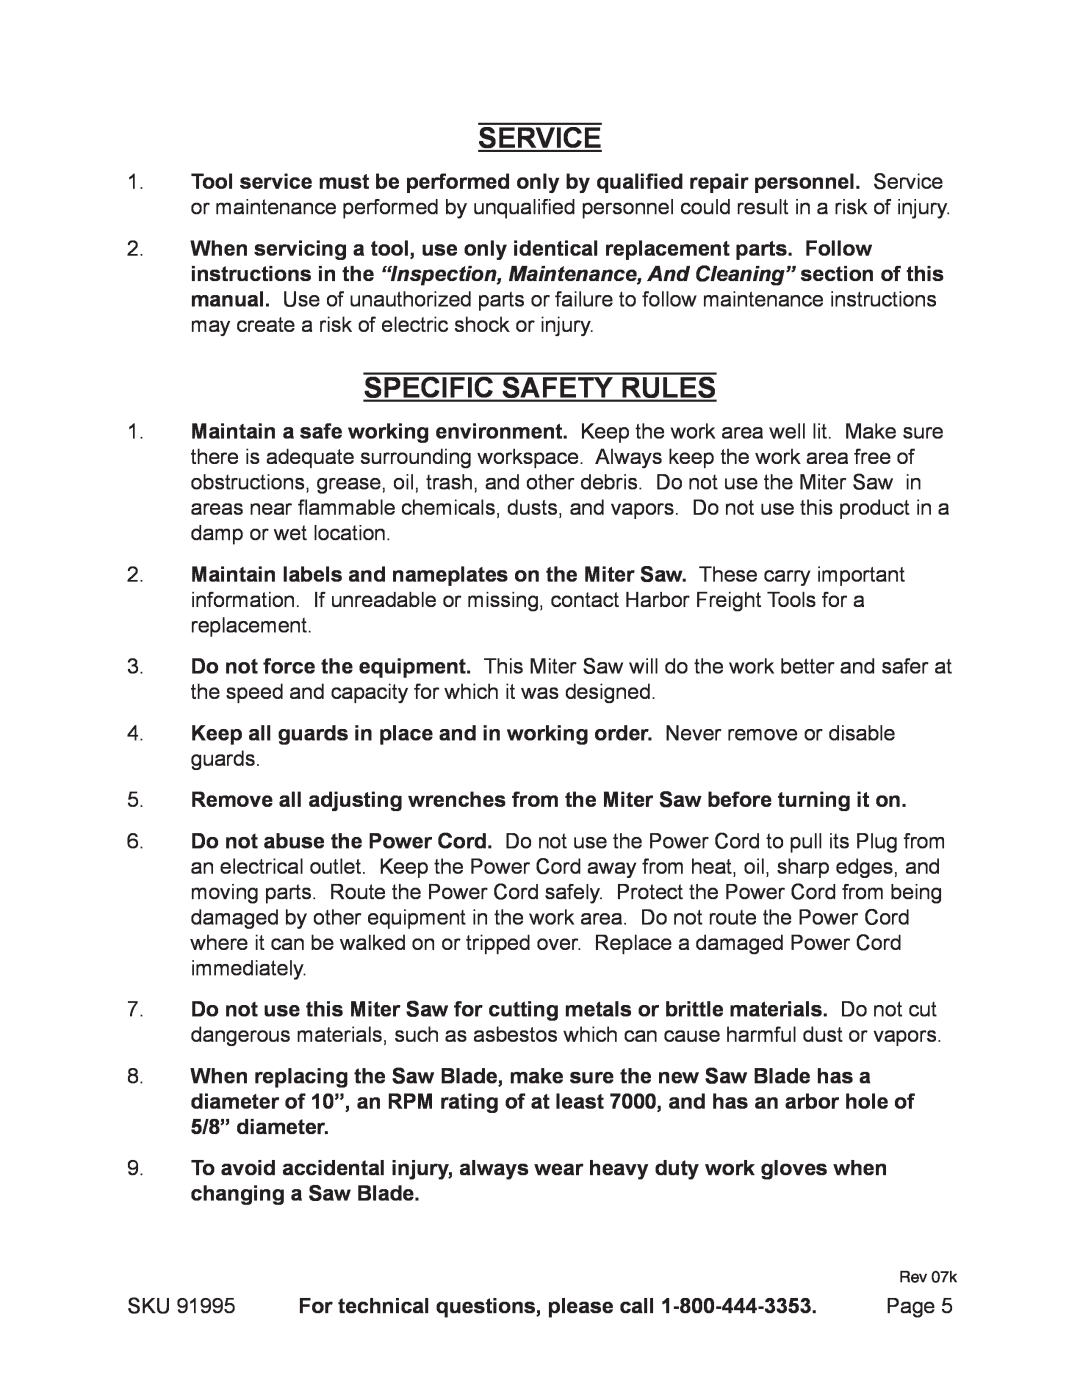 Chicago Electric 91995 operating instructions Service, Specific Safety Rules, For technical questions, please call 